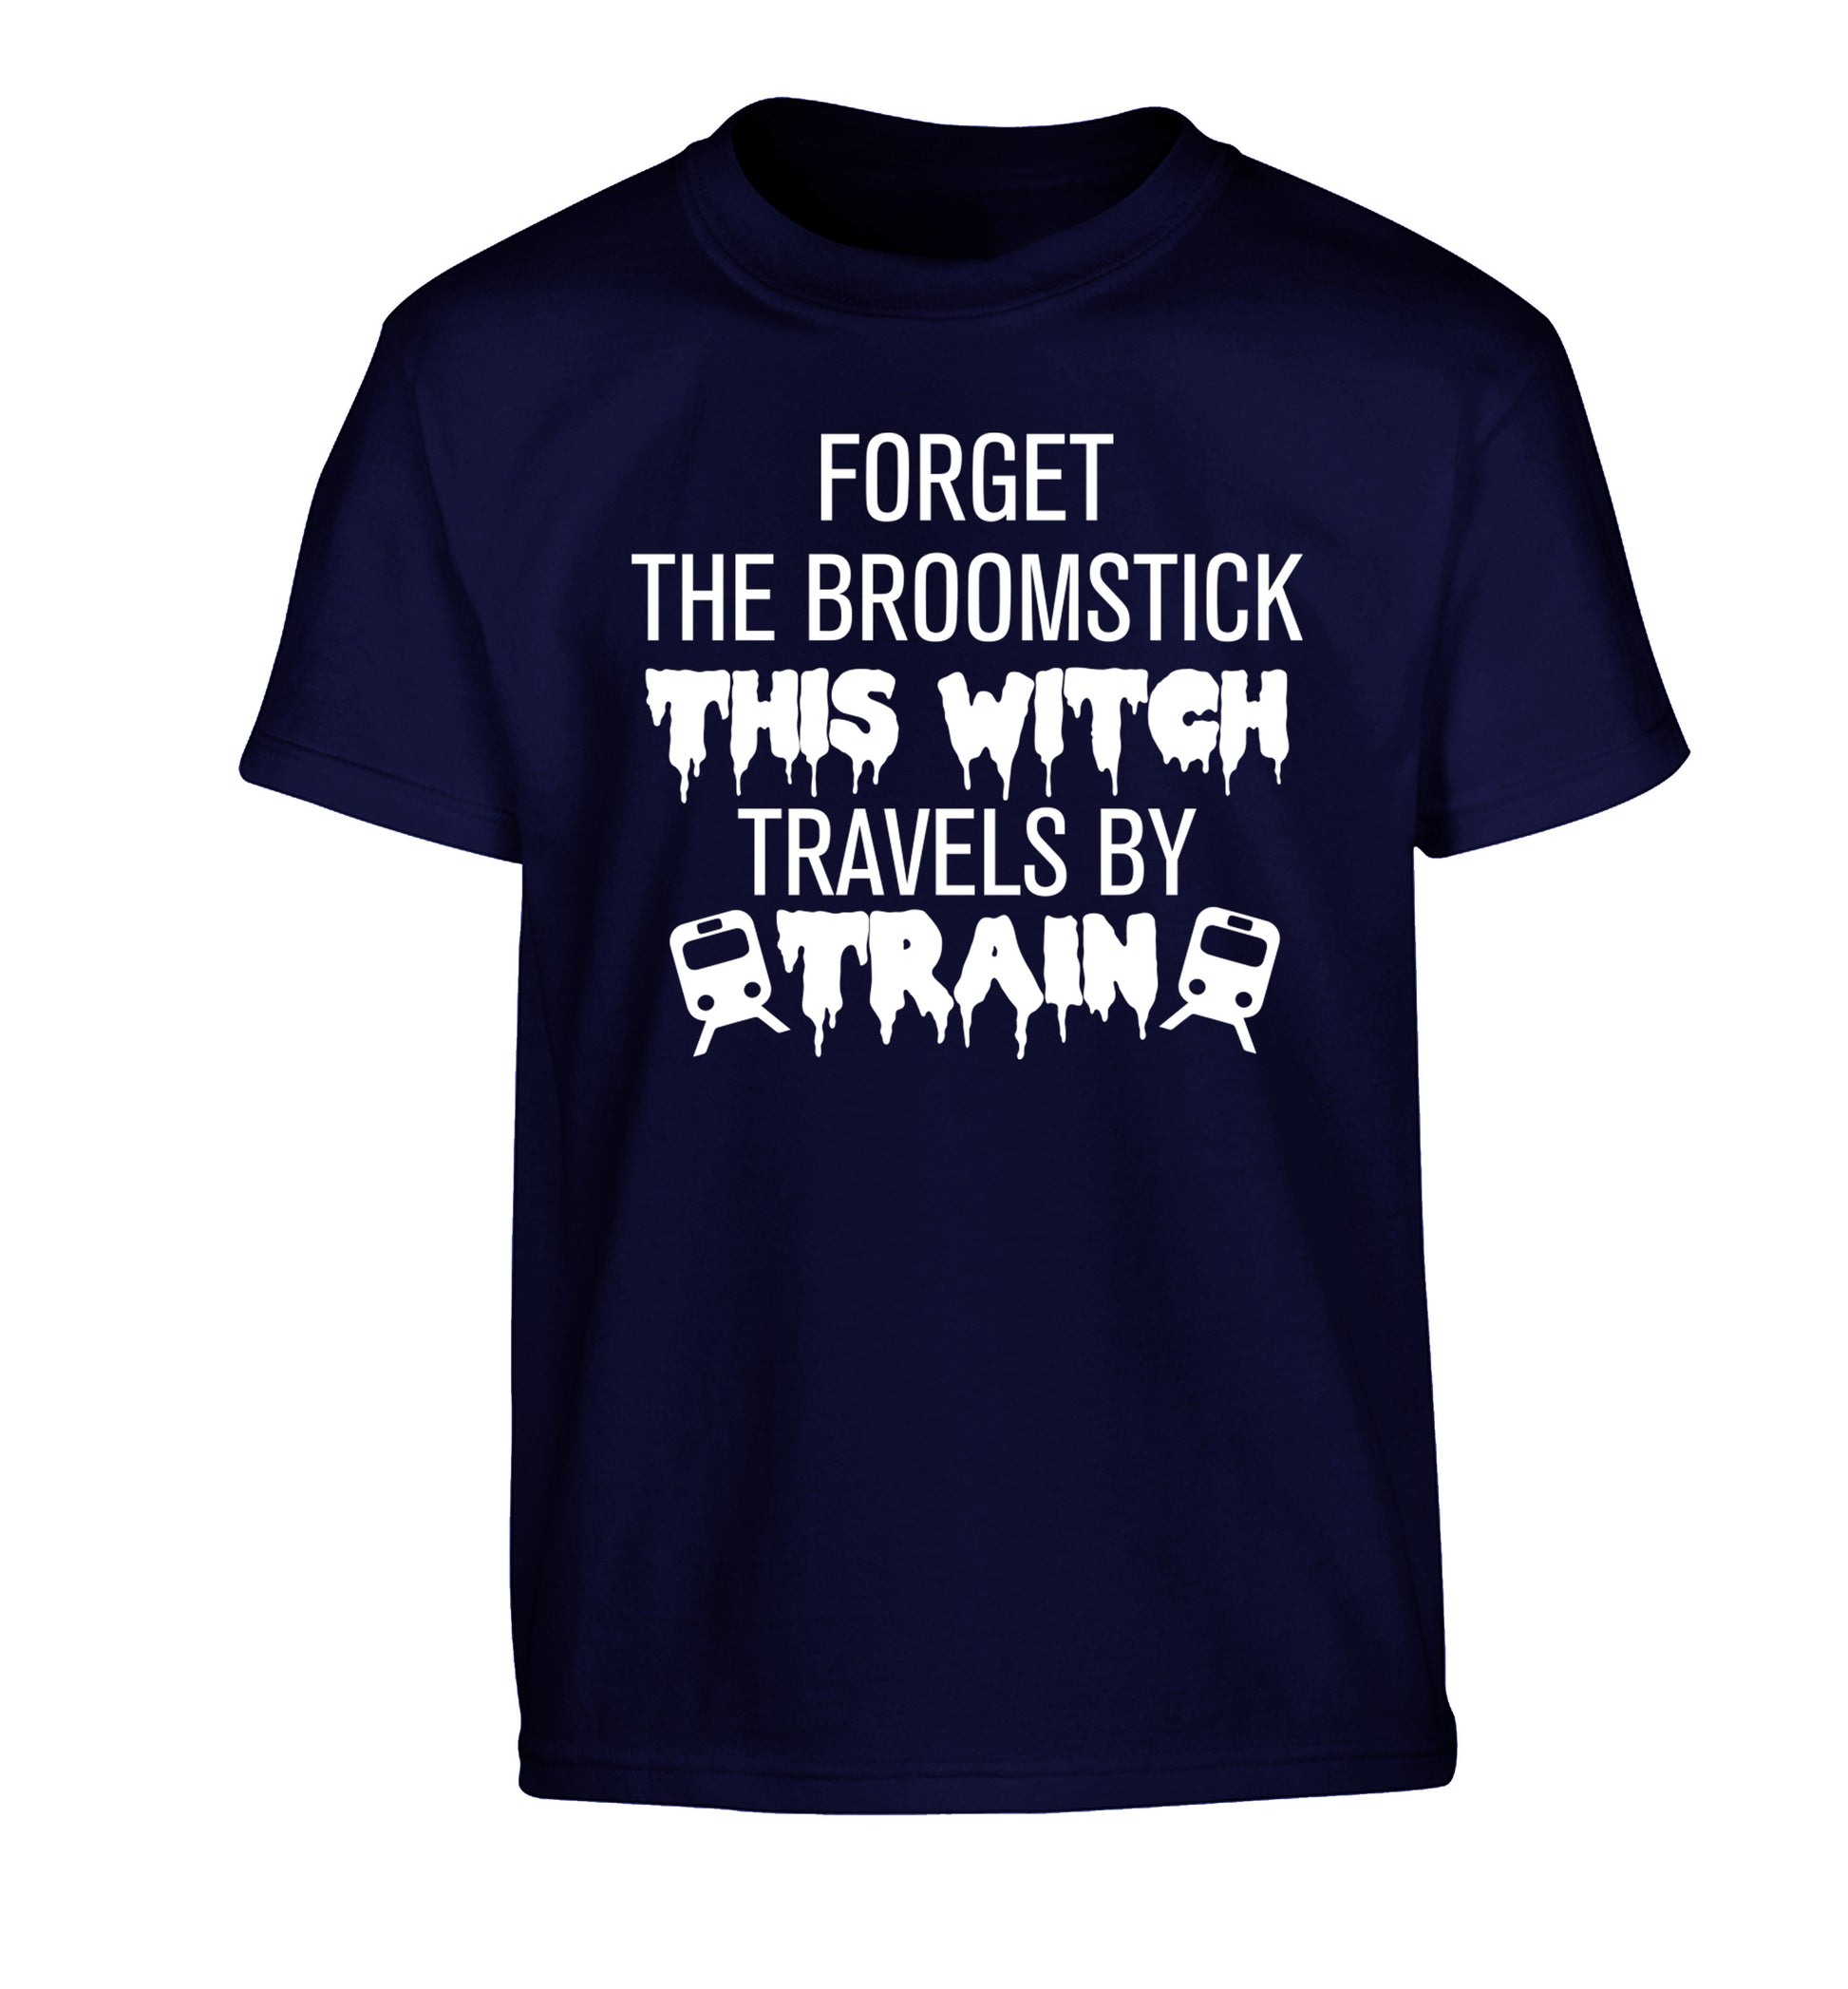 Forget the broomstick this witch travels by train Children's navy Tshirt 12-14 Years